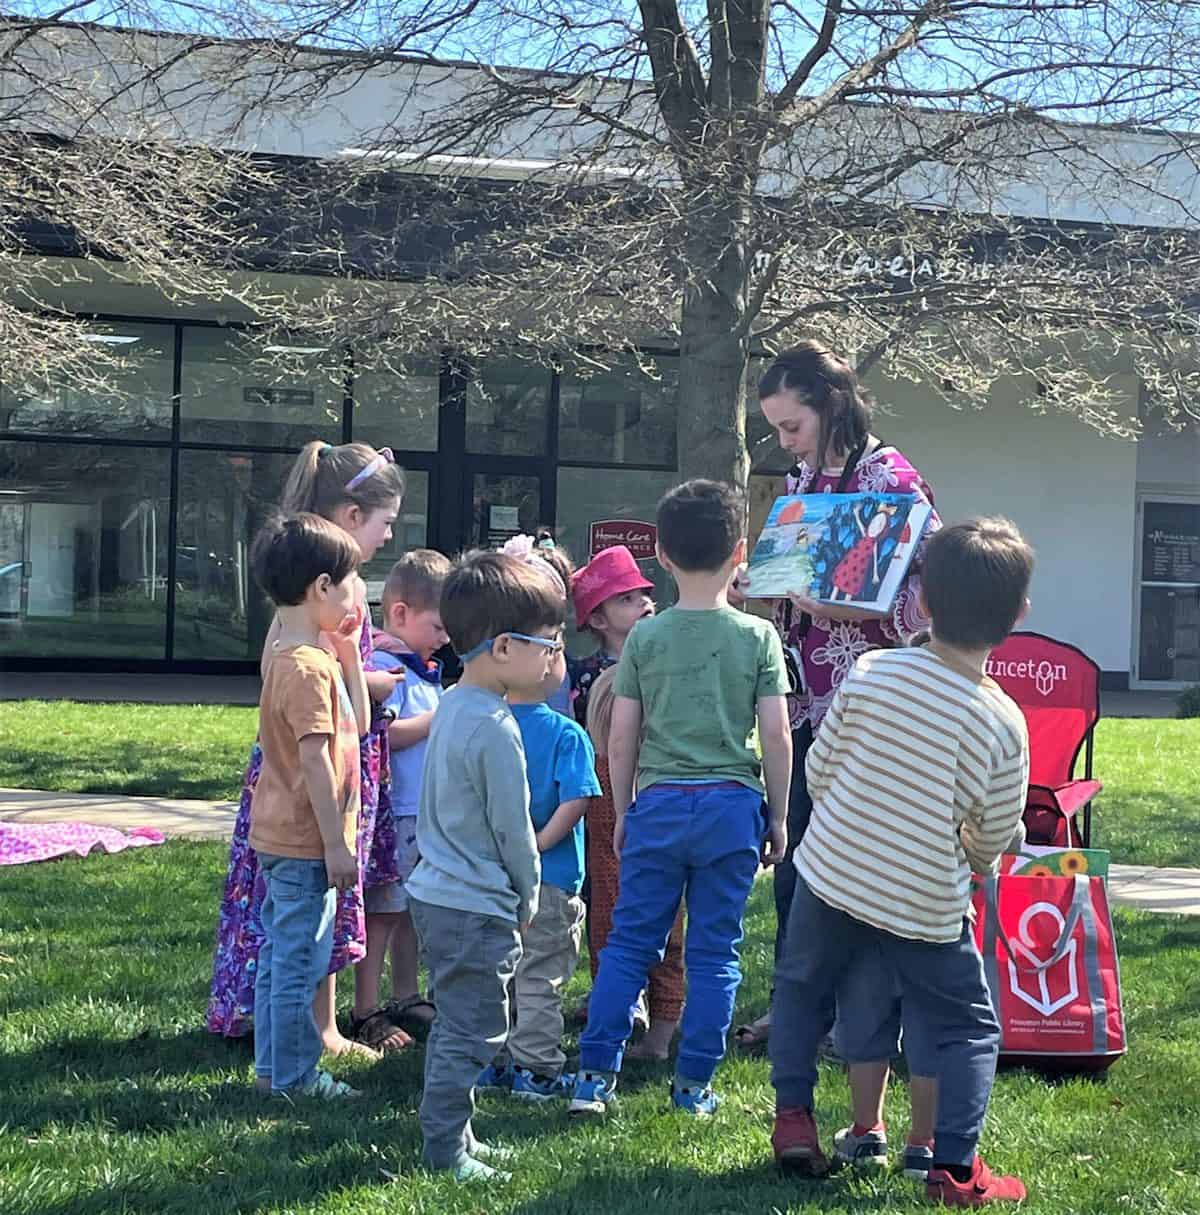 ‘Nature explorer’ backpacks for adults added to Princeton Public Library’s circulation offerings